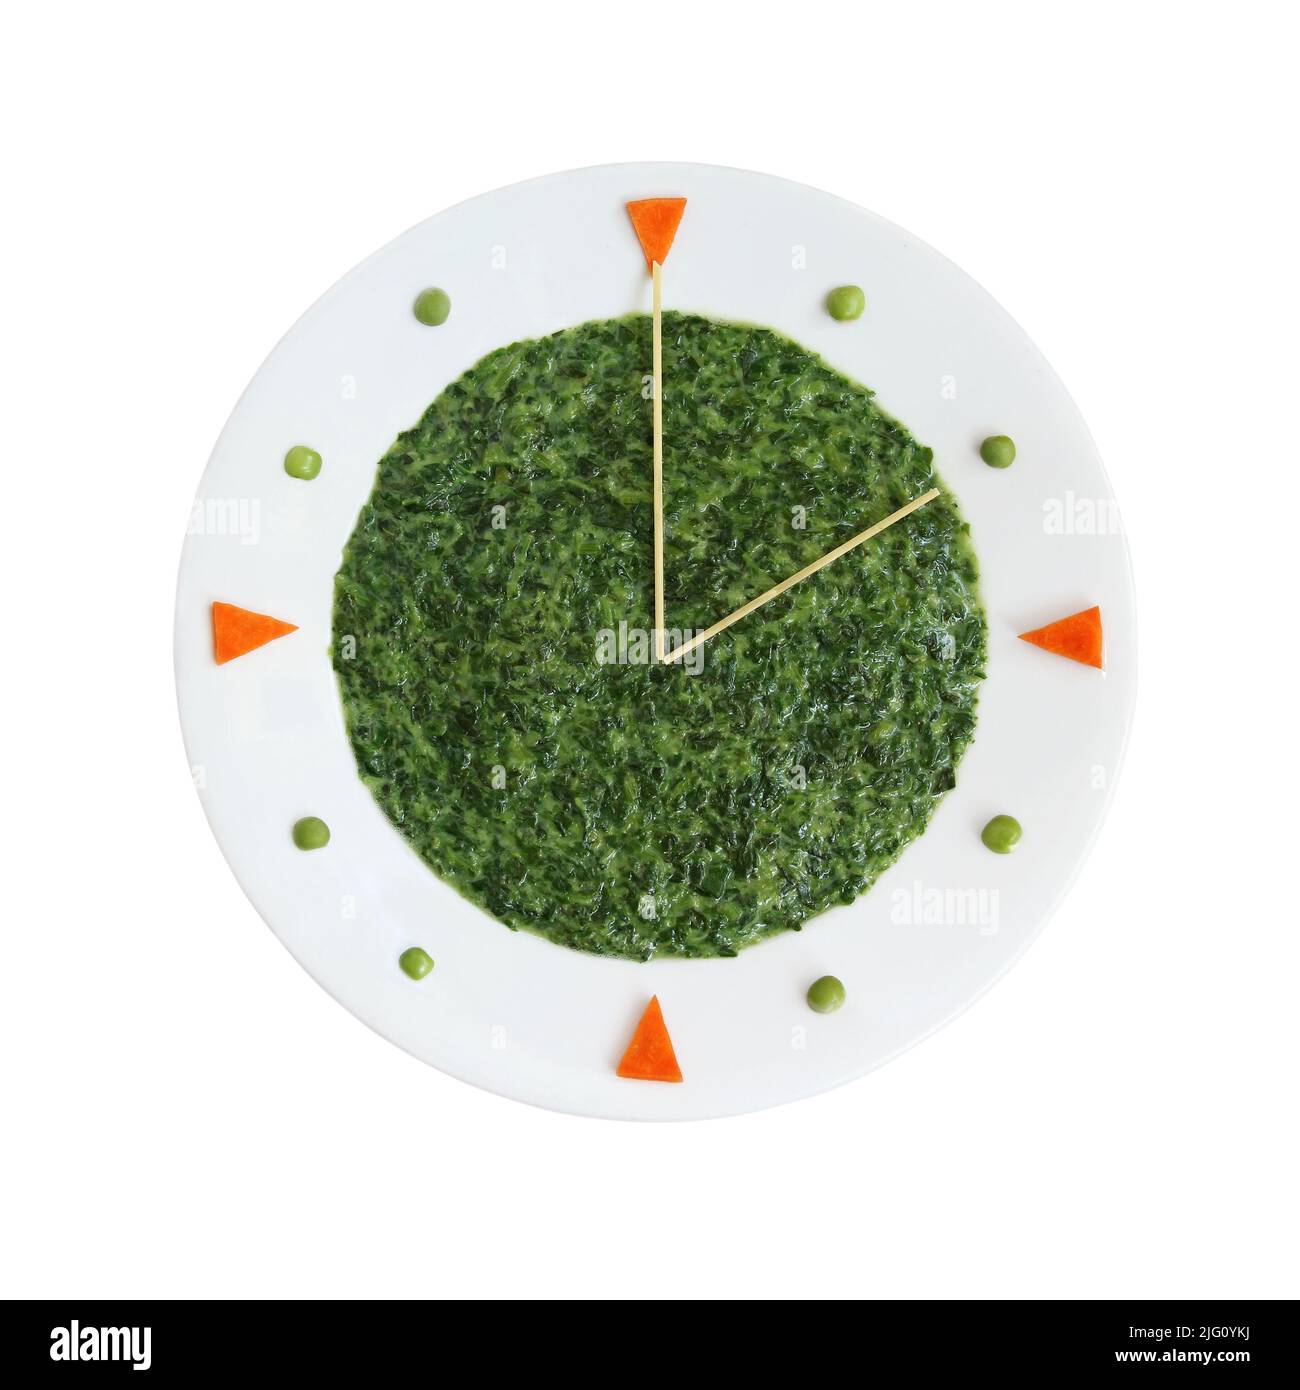 Food clock - plate with creamed spinach for health nutrition concept (manual focus on the spaghetti in the center) Stock Photo